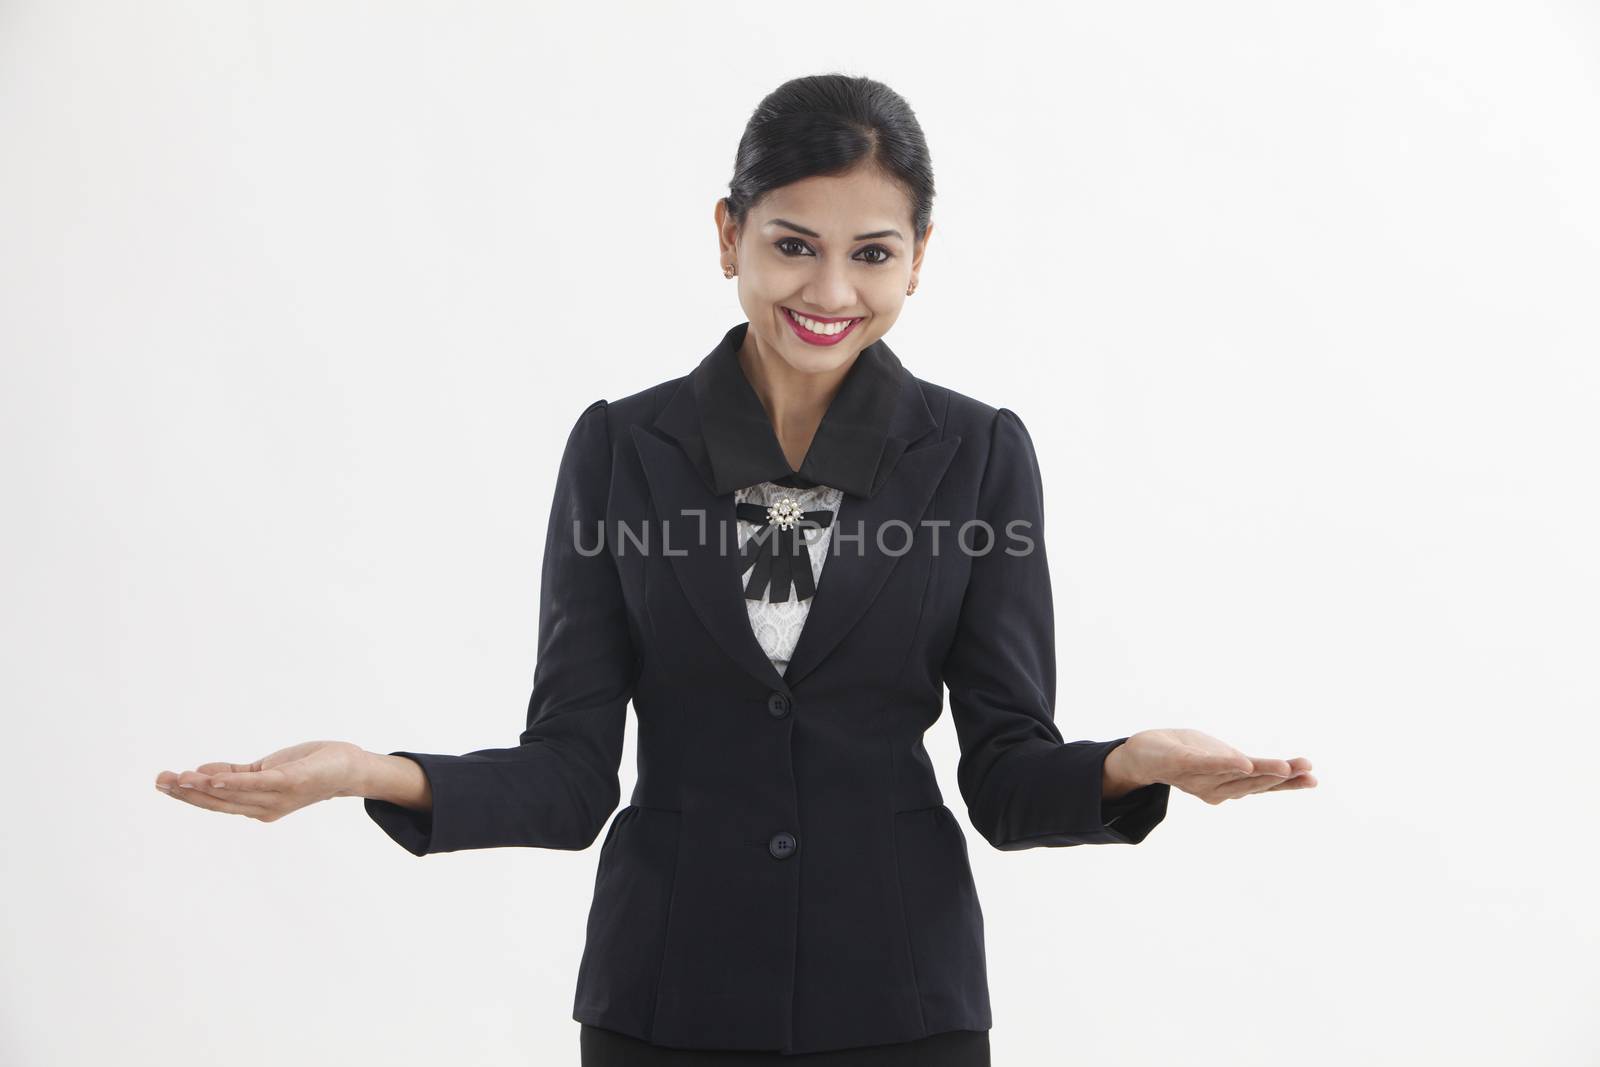 woman making a scale with her arms wide open, isolated in a white background